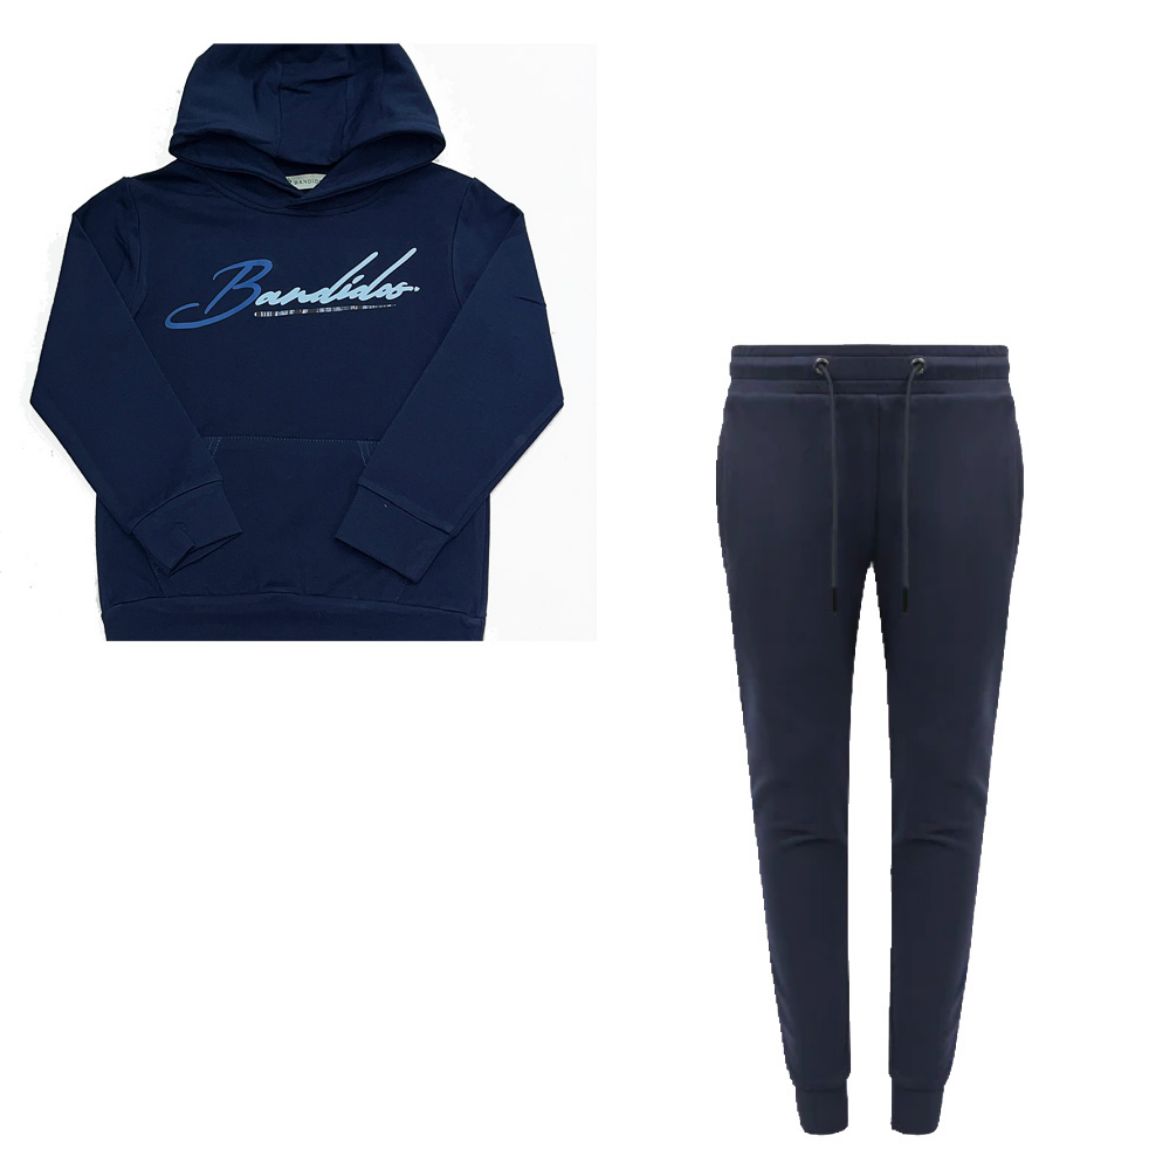 Picture of Moda Bandidos Boys Navy Tracksuit 